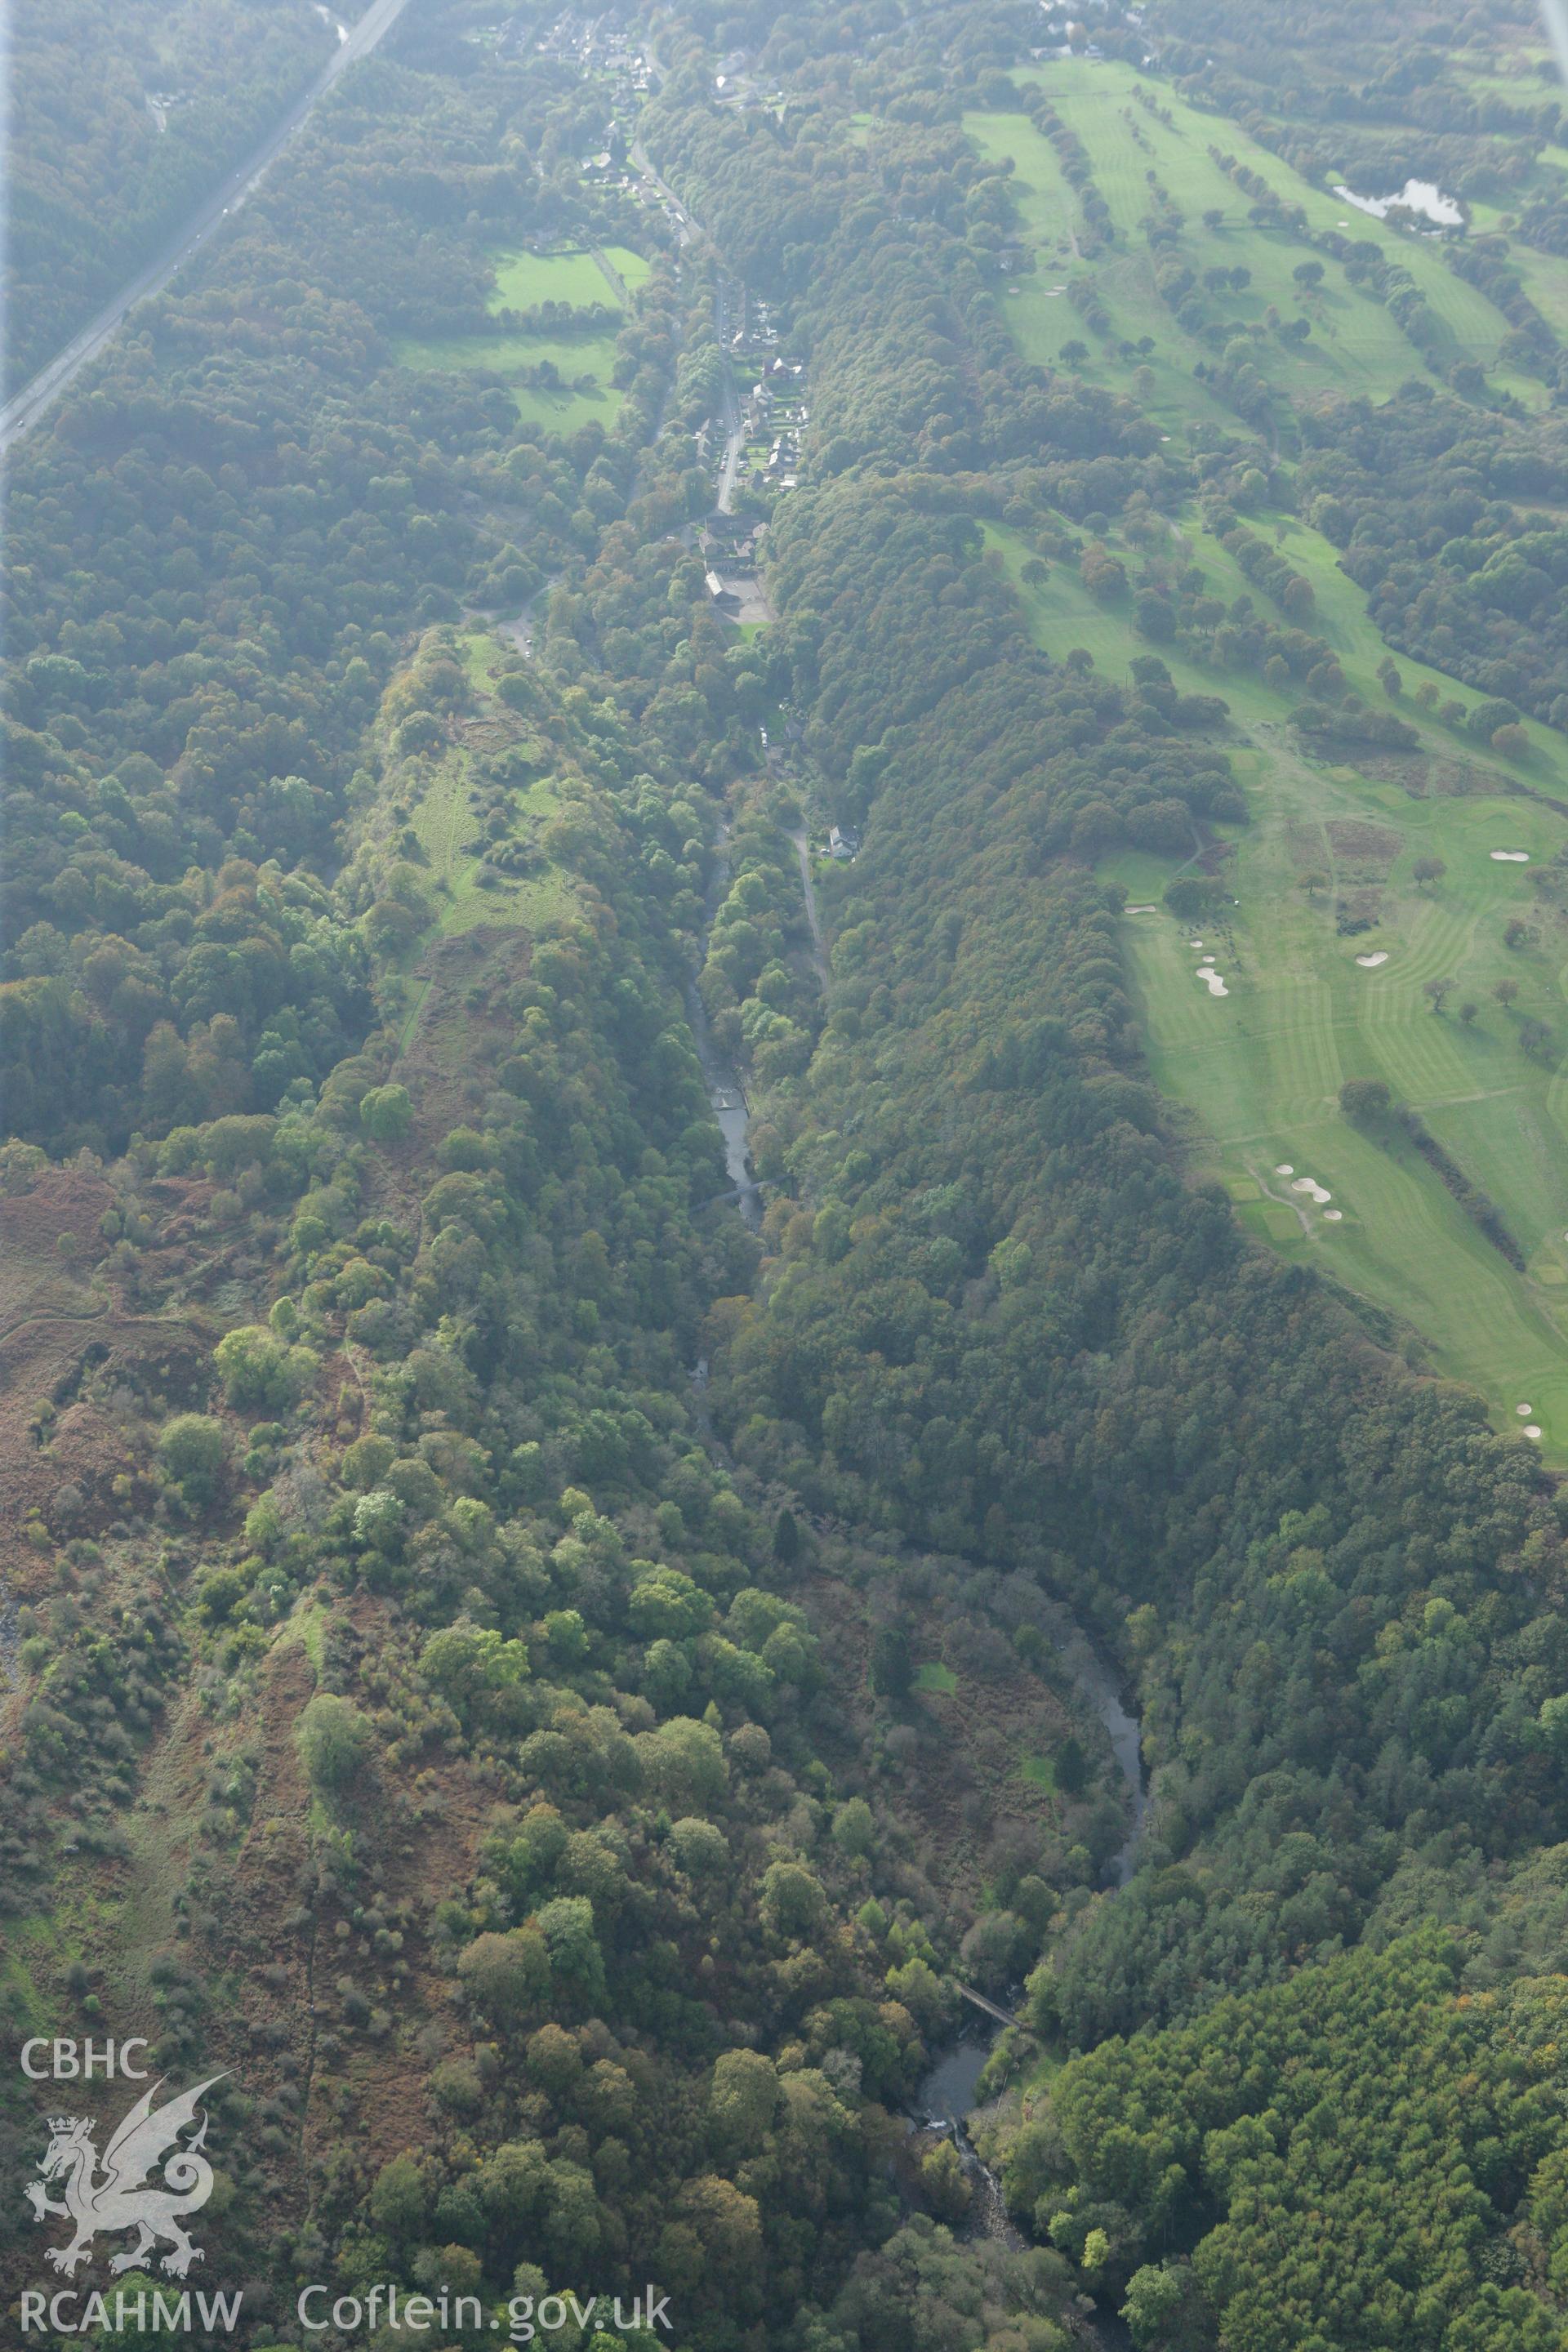 RCAHMW colour oblique aerial photograph of Glyn Neath Black Powder Works. Taken on 14 October 2009 by Toby Driver